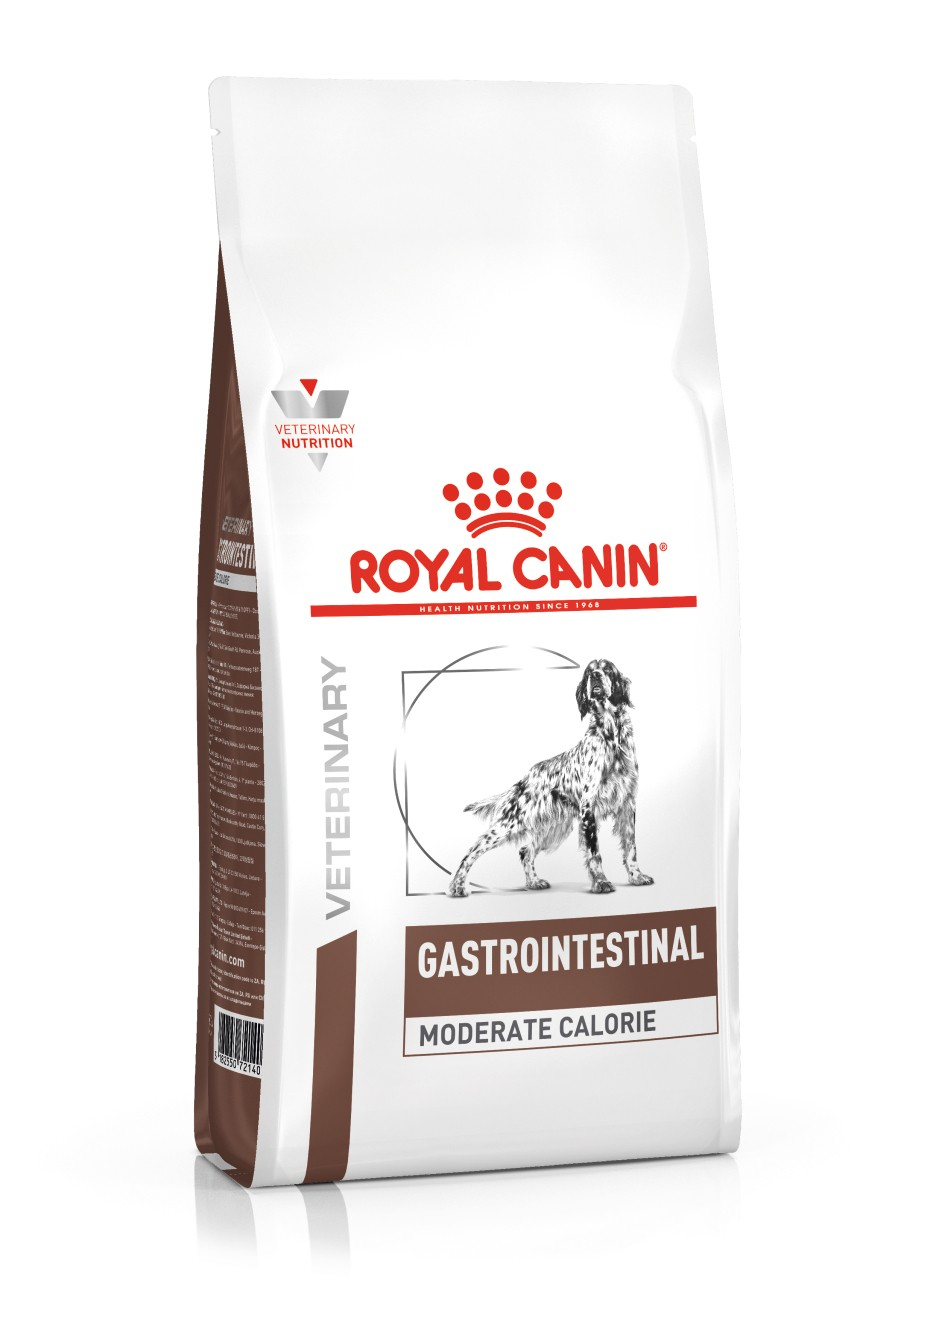 Royal Canin Veterinary Diet Gastro Intestinal Moderate Calorie Chien 